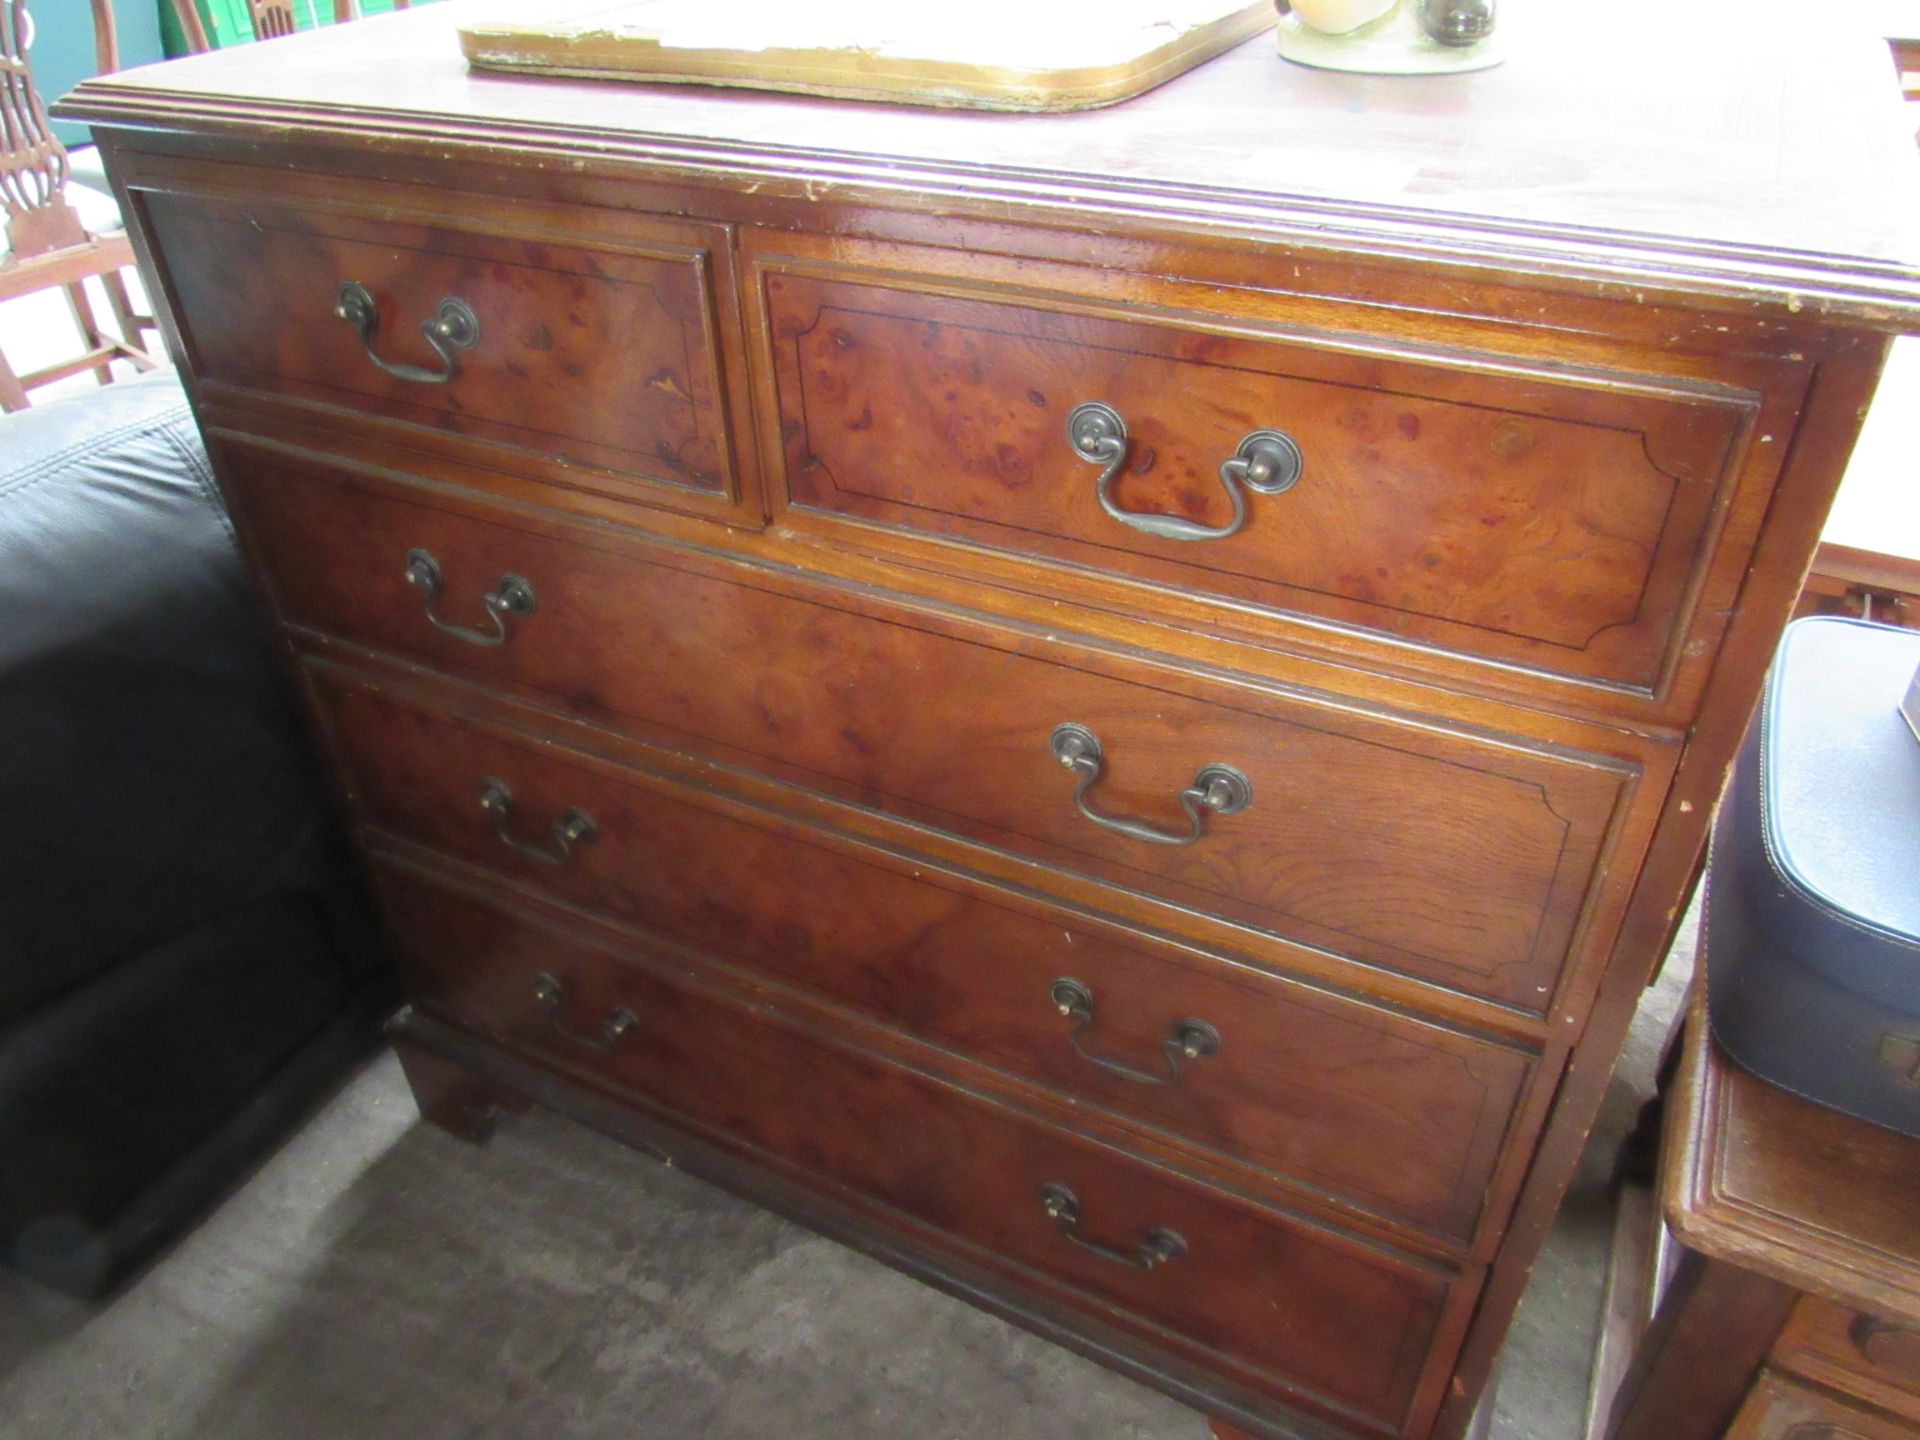 Chest of 2 over 3 drawers.